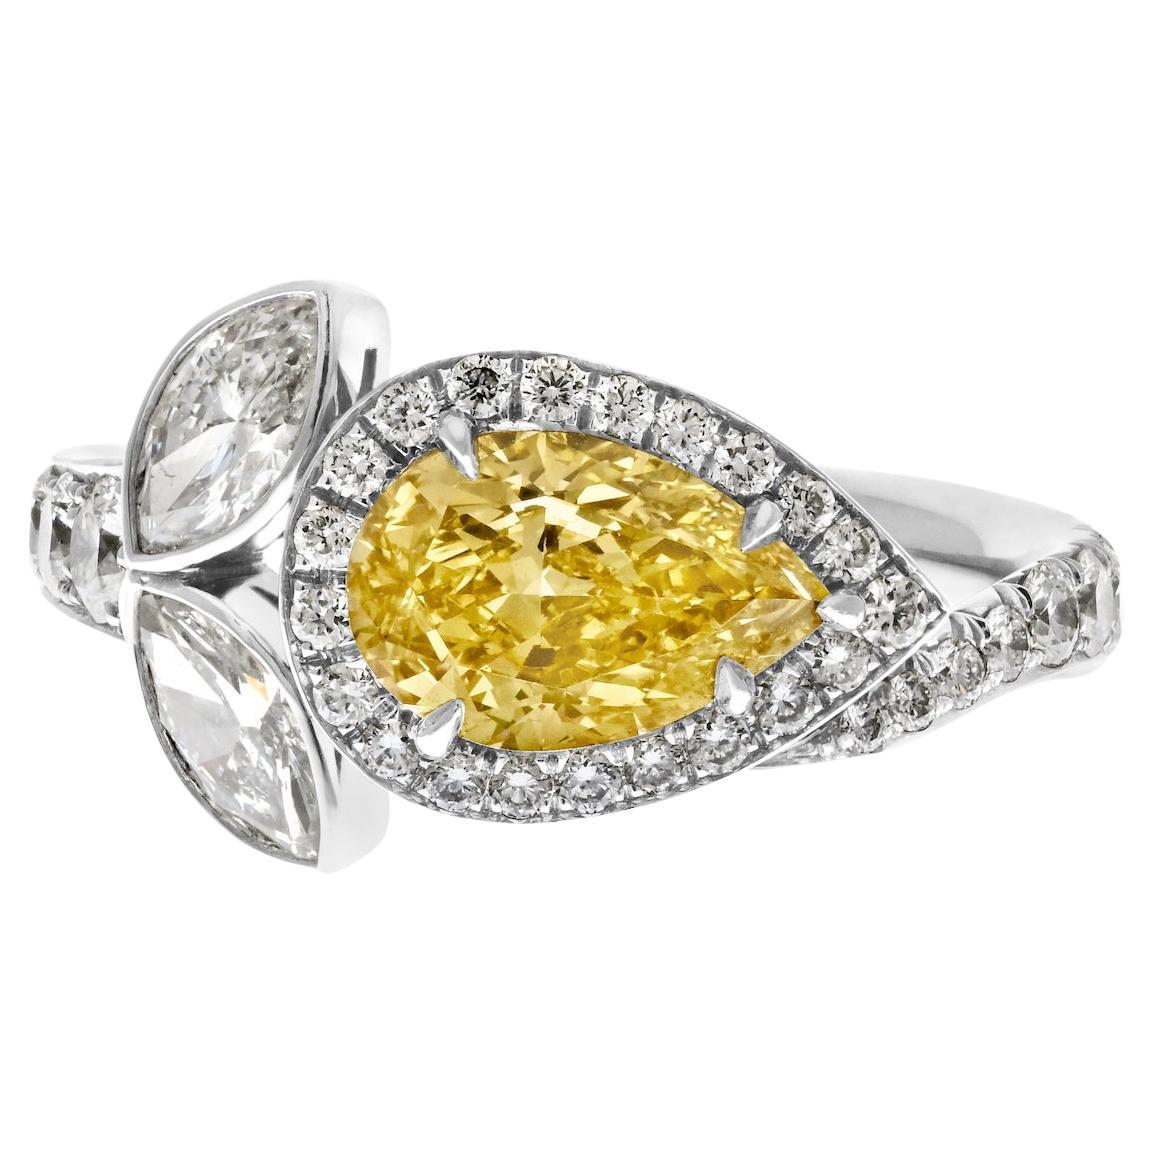 East West 1.17ct Fancy Yellow Pear cut Sapphire Halo Flower Cocktail Ring For Sale